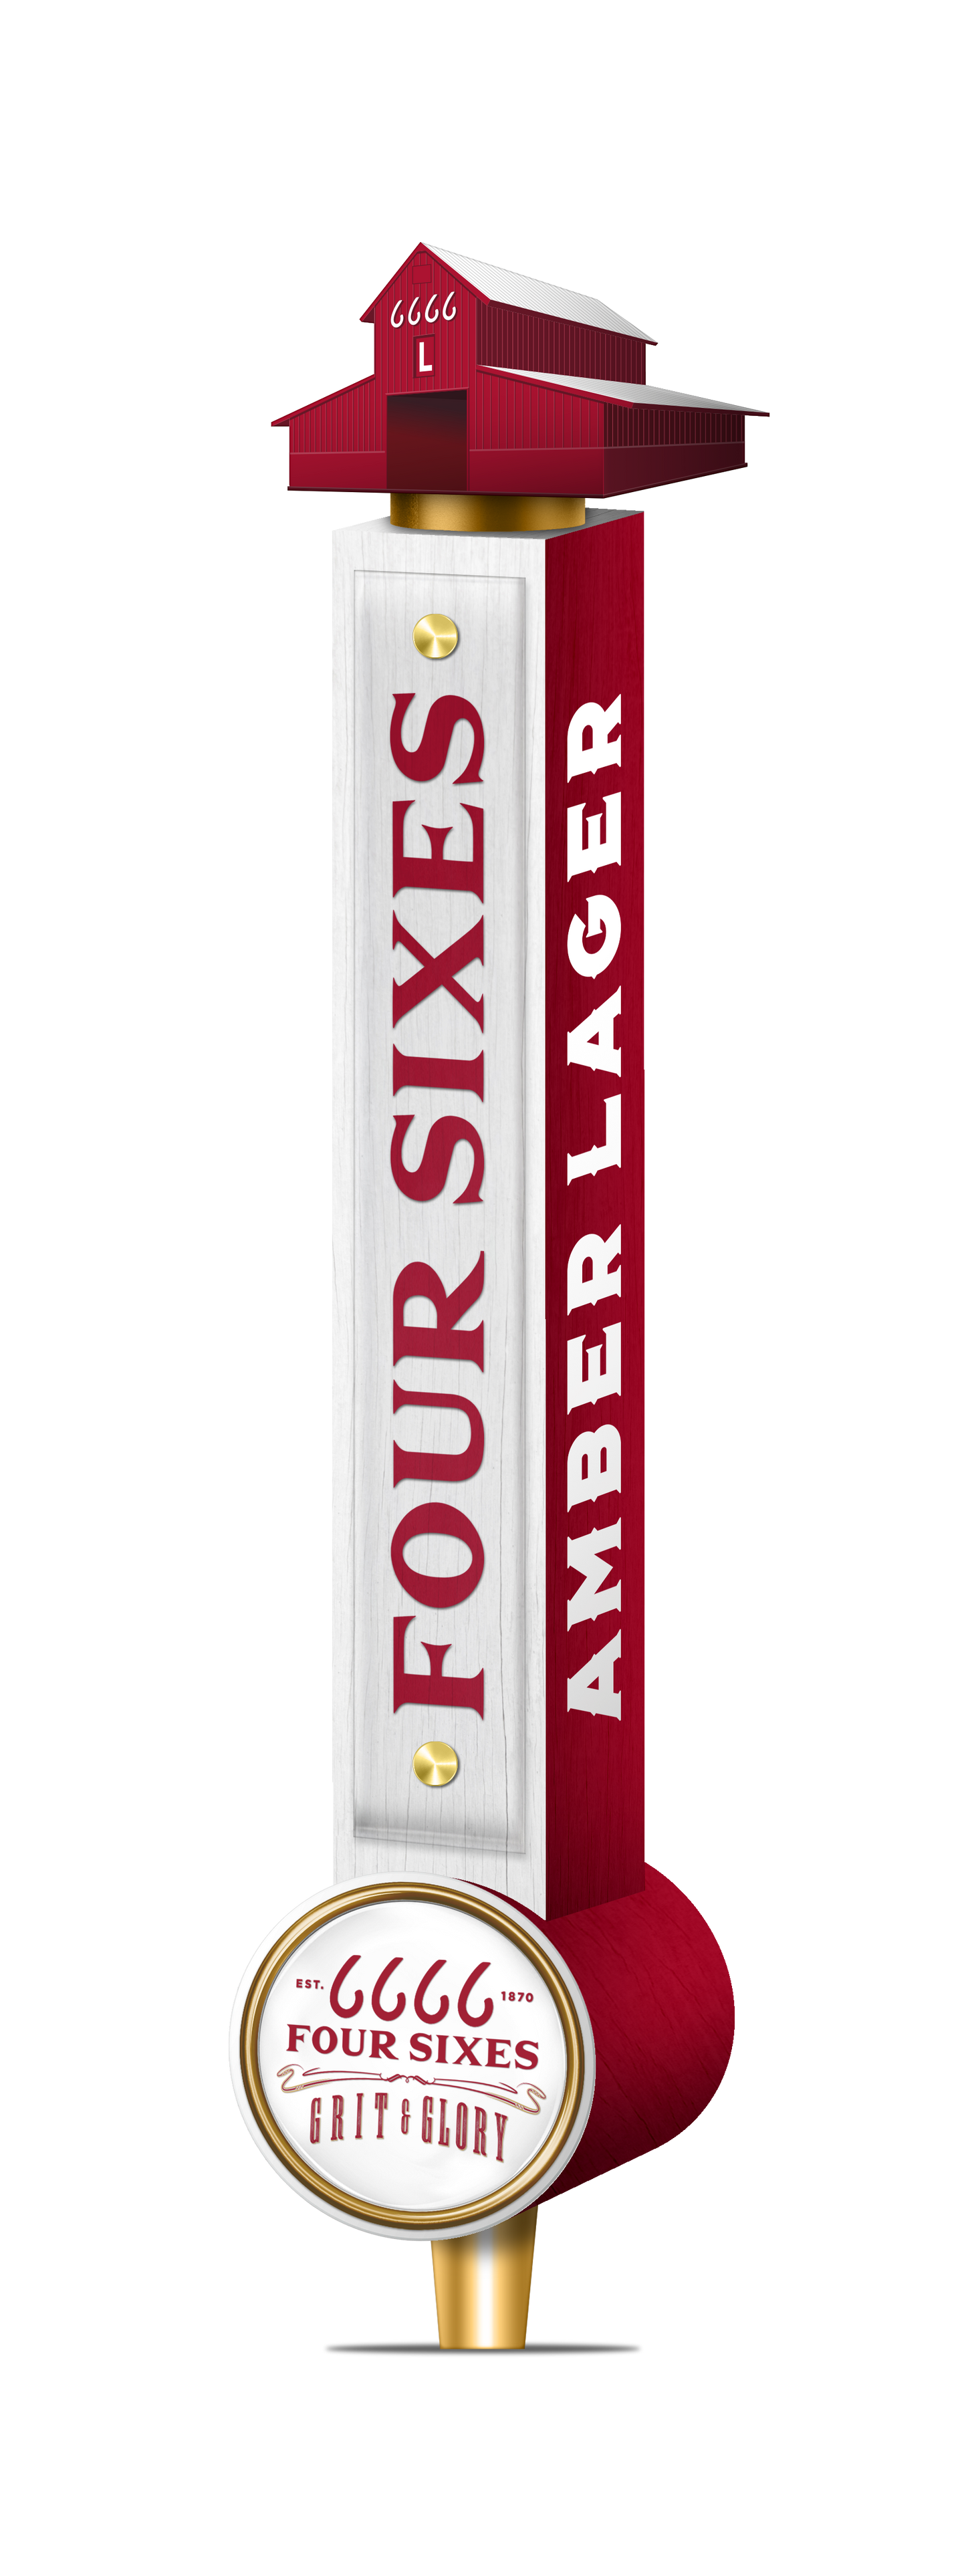 Grit & Glory Tap Handle - Amber Lager